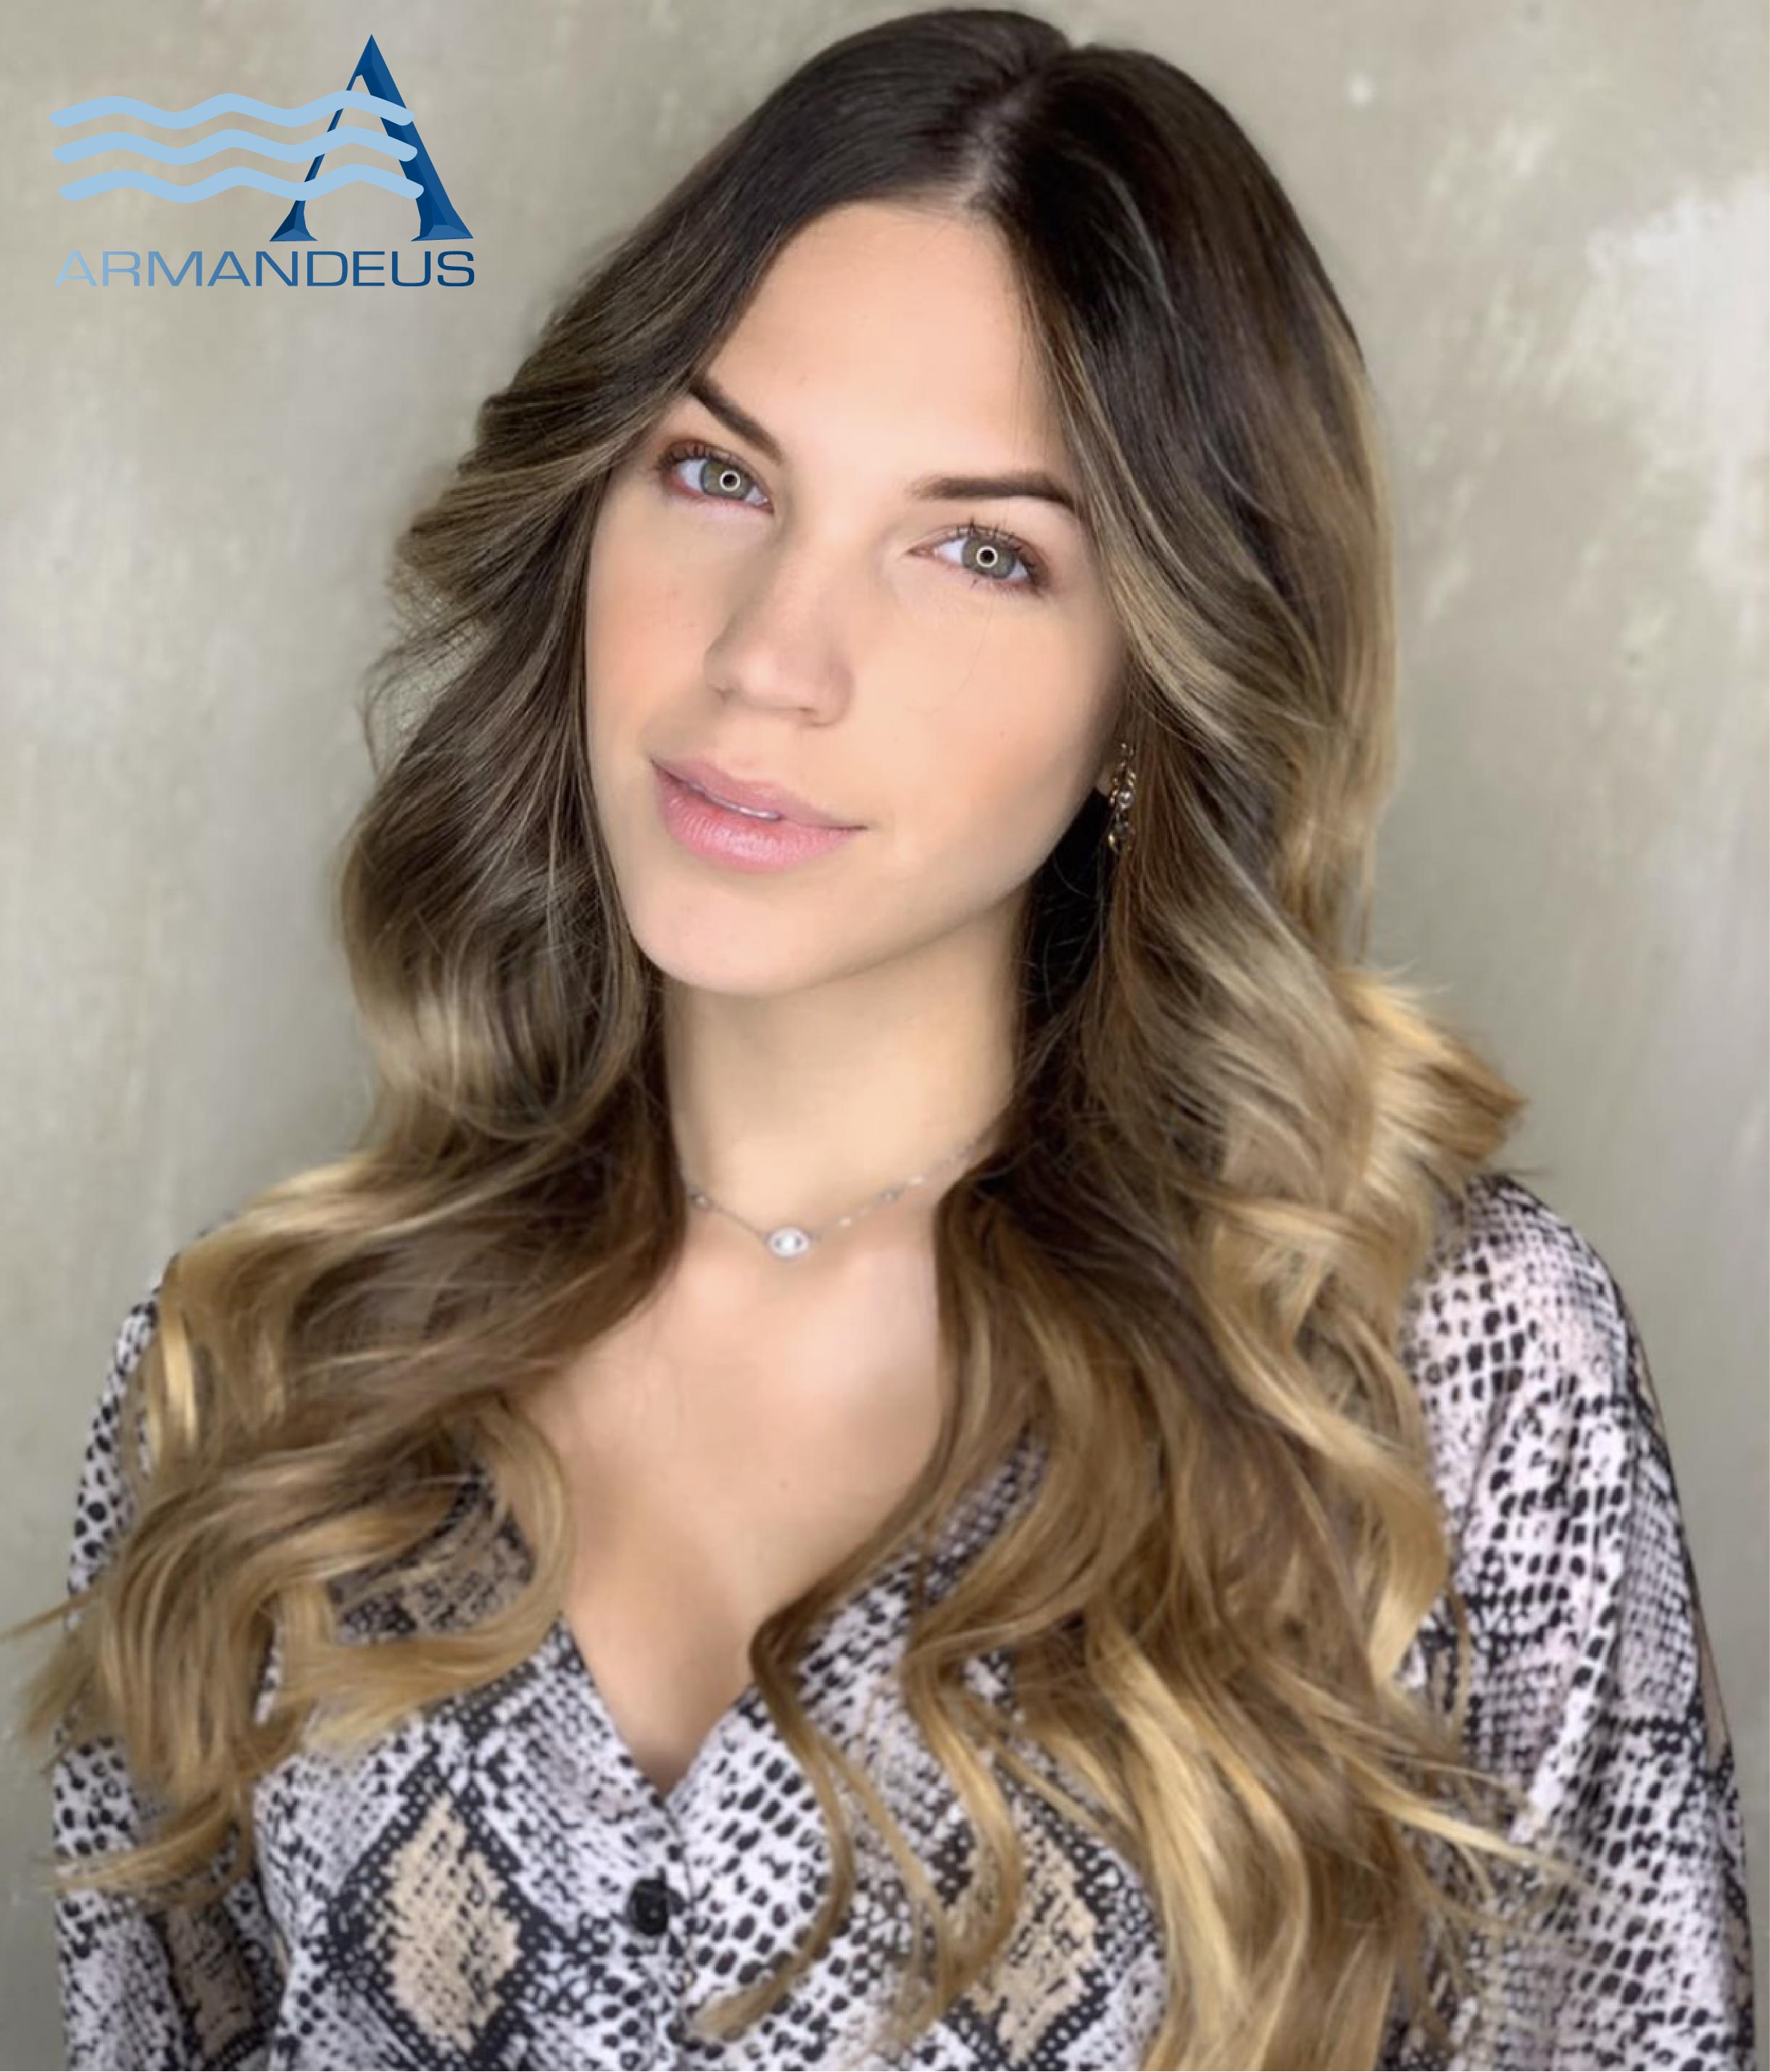 Hair color and style done at Salon Armandeus Madrid